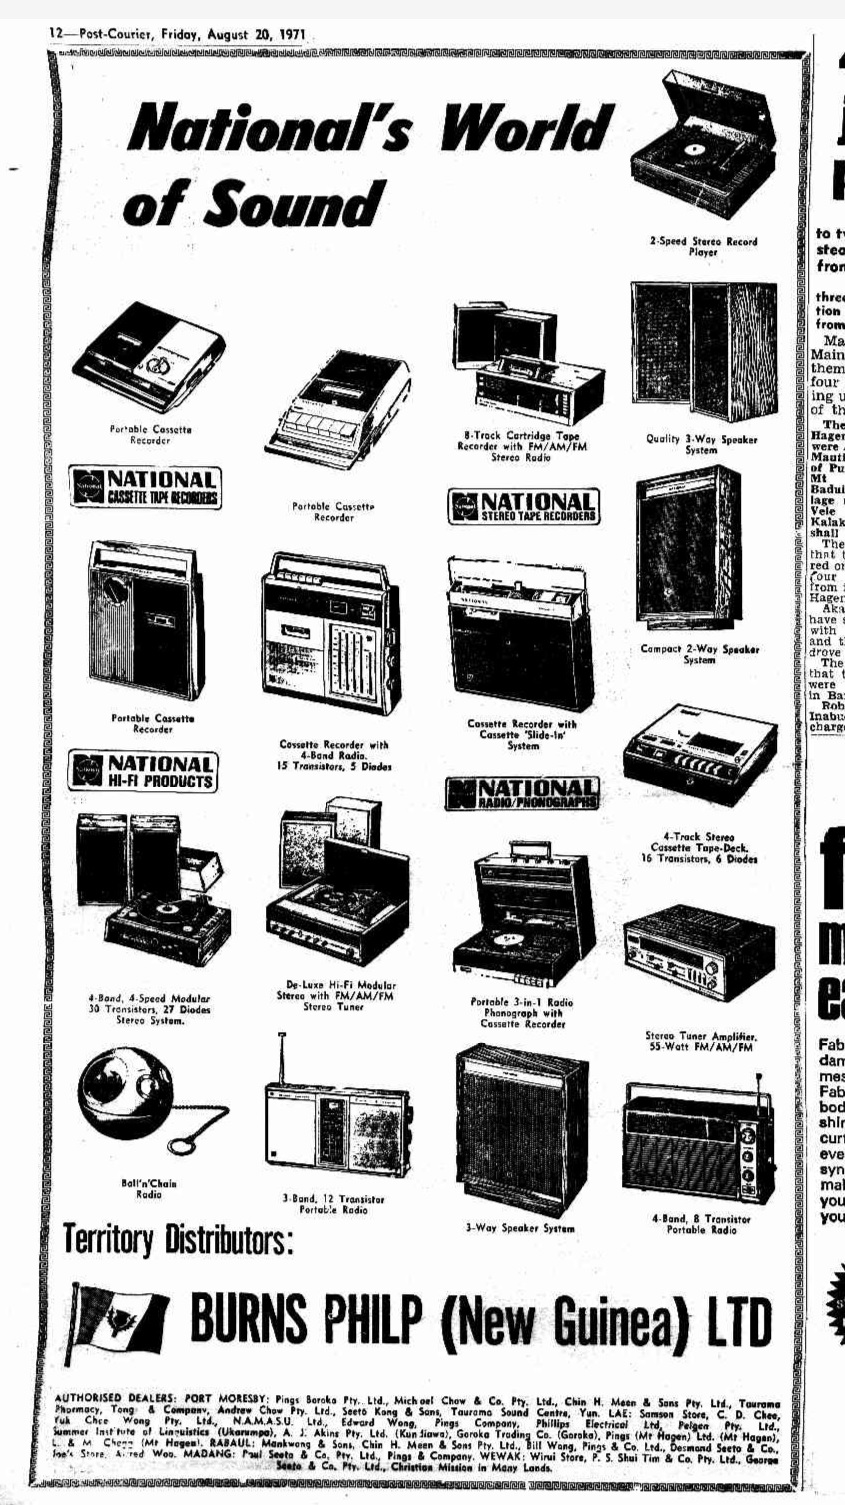 Portable Cassette Newspaper Ads! | Page 39 | Stereo2Go forums